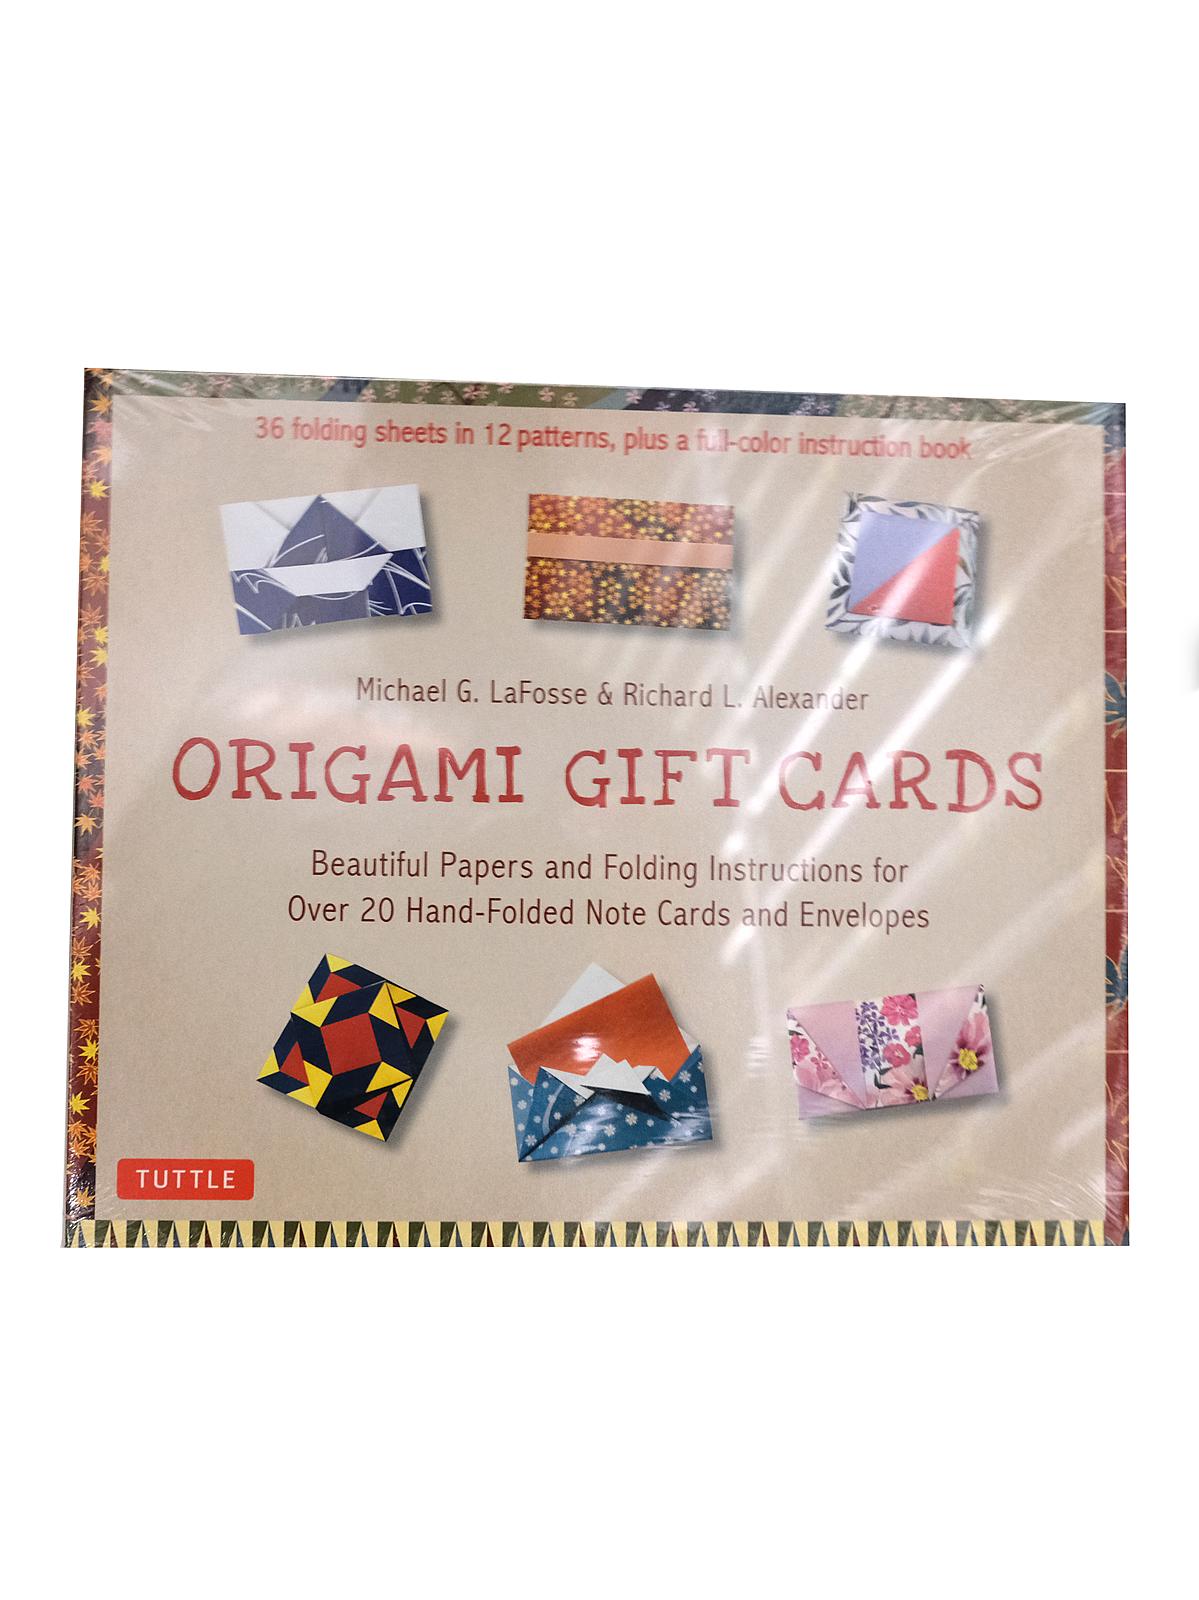 Origami Gift Cards Kit each